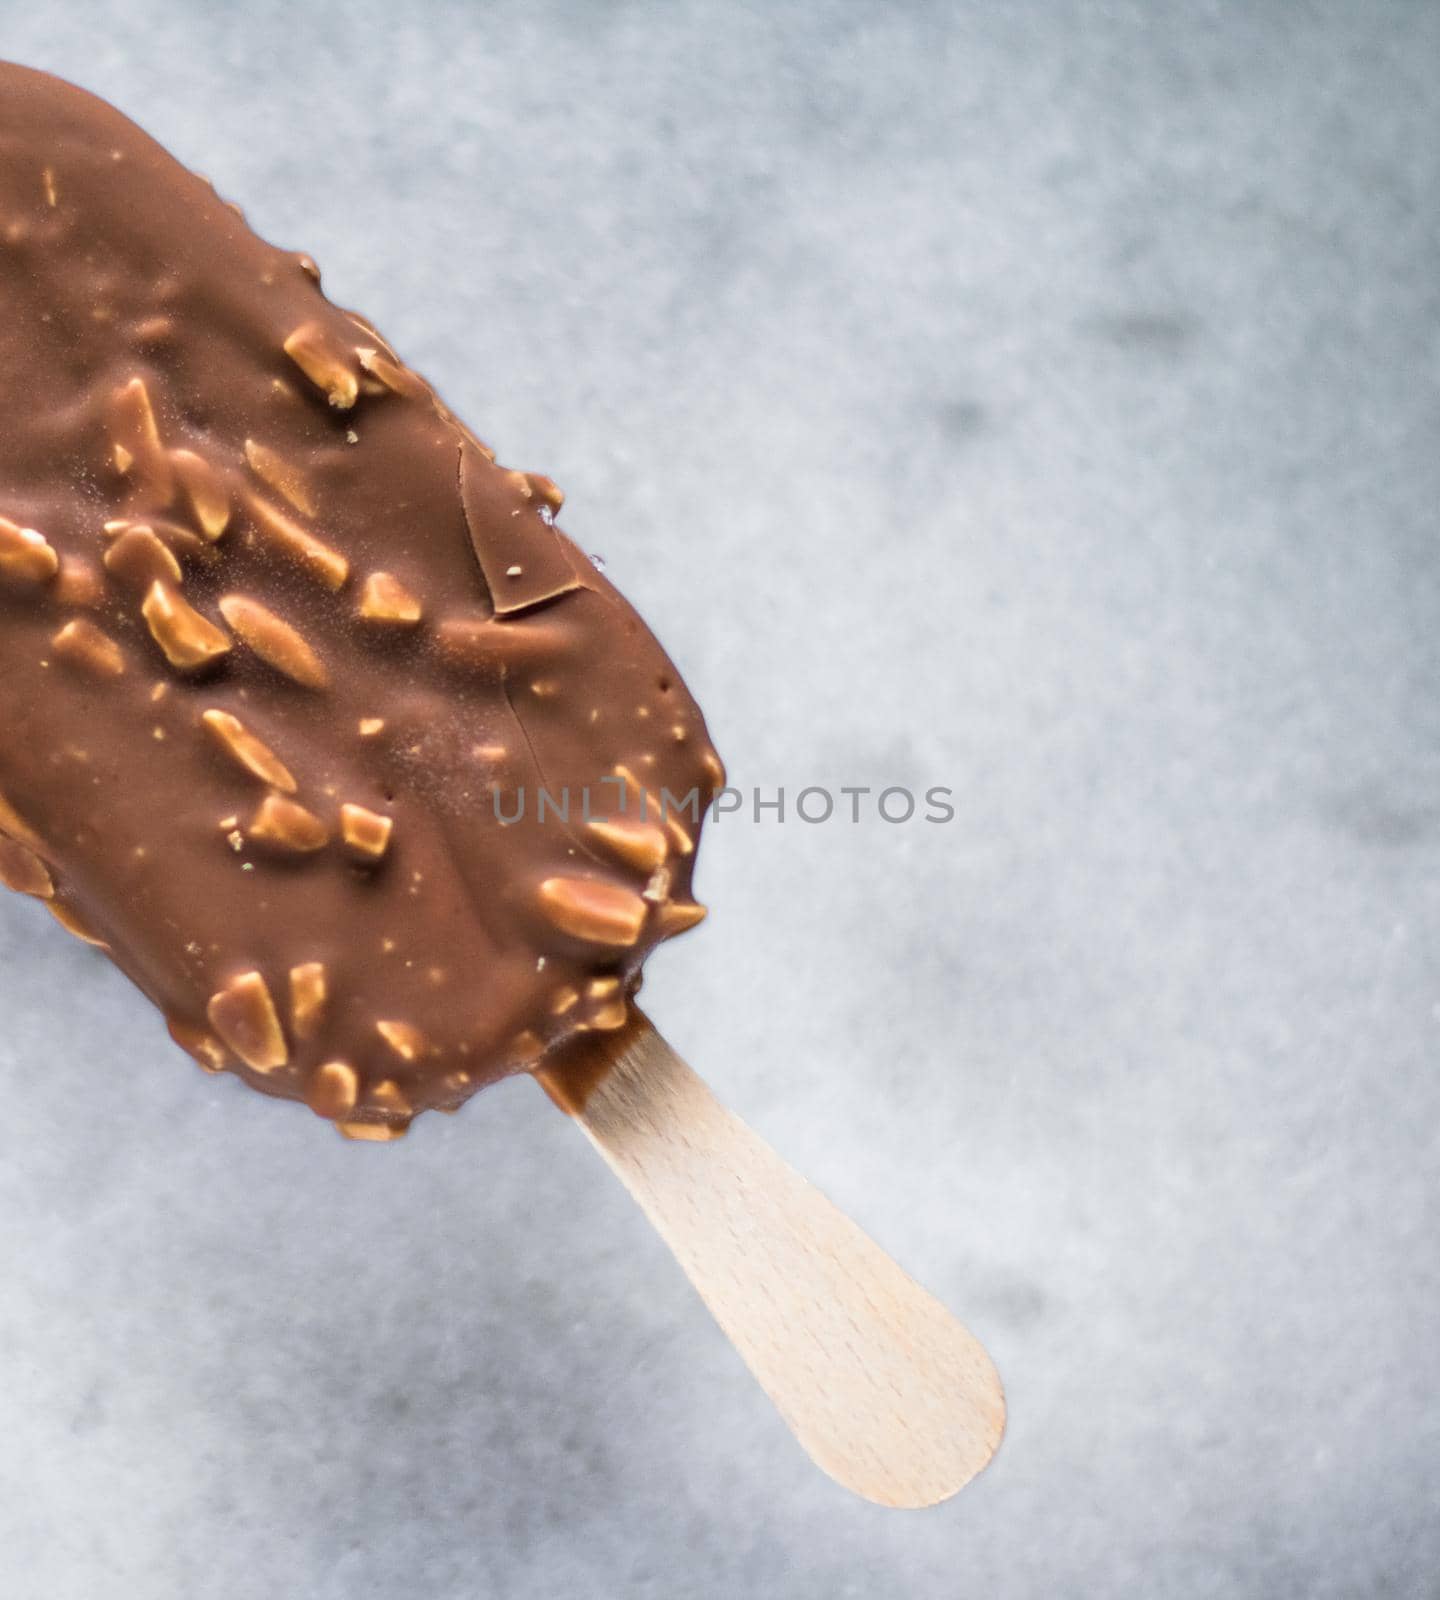 chocolate almond ice cream - pastry and sweet food styled concept, elegant visuals